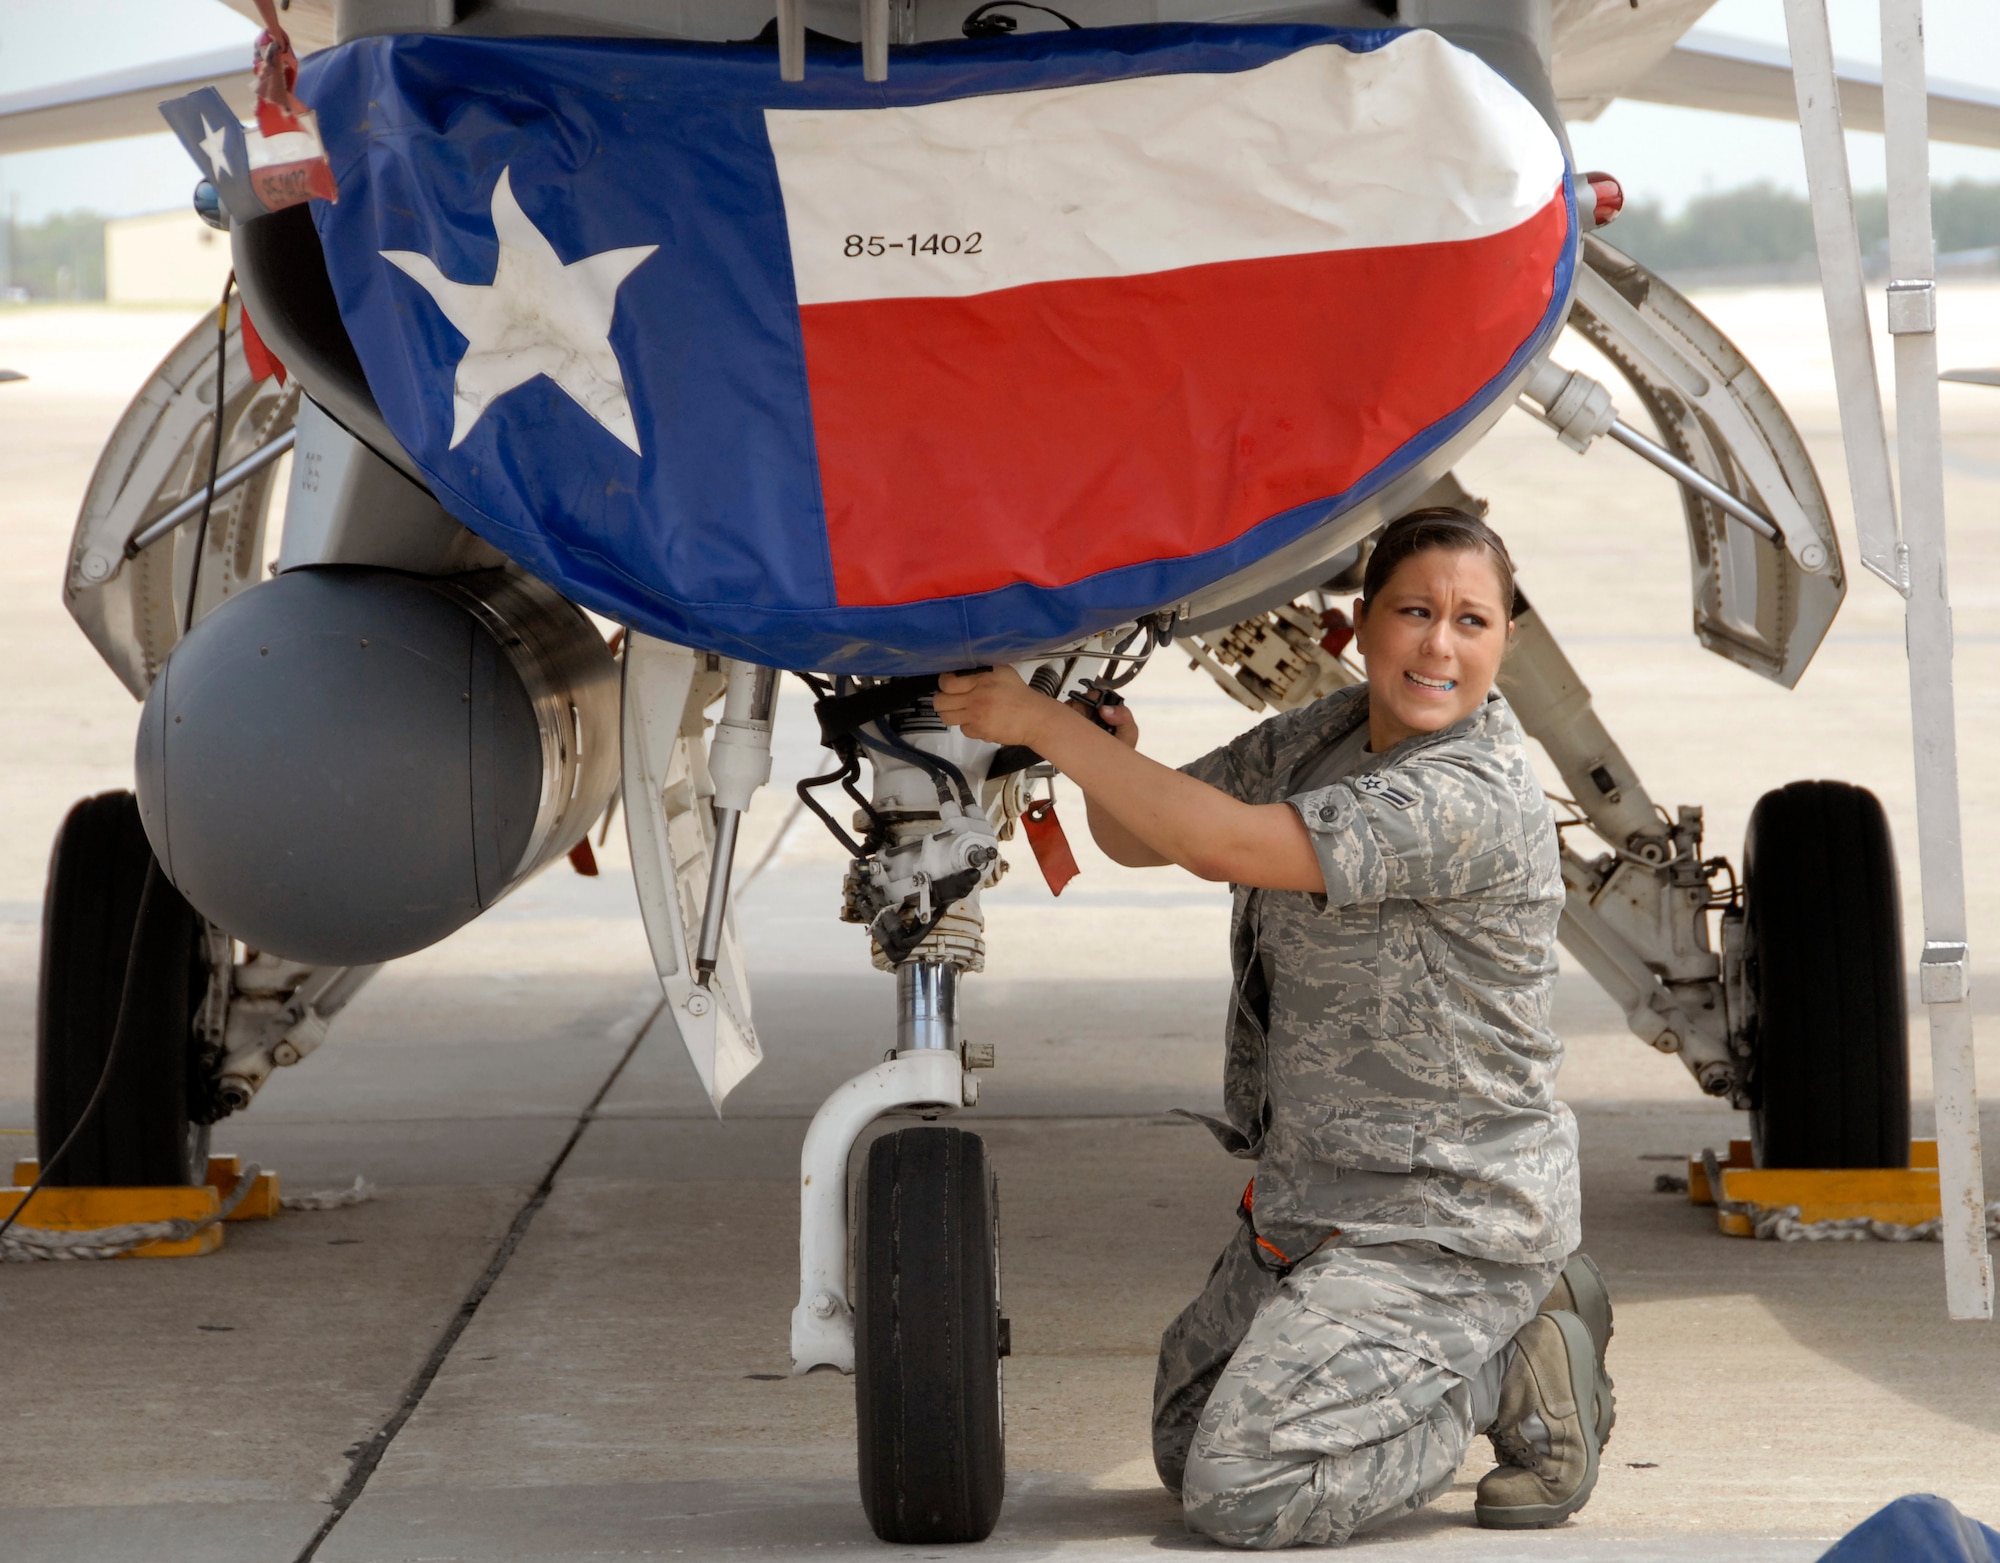 Airman 1st Class Heather Hernandez attaches a cover, embazoned with a stylized Texas state flag, to the intake scoop of an F-16 Fighting Falcon May 13 on the flight-line at Whiteman Air Force Base, Mo.  Airman Hernandez is one of approximately 20 reservists from the 301st Fighter Wing who traveled to Whiteman to assist the 442nd Fighter Wing with an operational-readiness exercise May 14 and 15.  The 442nd FW, an A-10 Thunderbolt II unit based at Whiteman, is preparing for an operational-readiness inspection in October.  Pilots from the 301st FW's 457th Fighter Squadron served as opposing forces, flying training sorties to provide realistic air-to-air threats against the 442nd Fighter Wing's A-10 aircraft.  The 301st FW is based at Naval Air Station, Joint Reserve Base, Fort Worth, Texas.  Airman Hernandez is an F-16 crew chief from the 301st Aircraft Maintenance Squadron.  (U.S. Air Force photo/Maj. David Kurle)